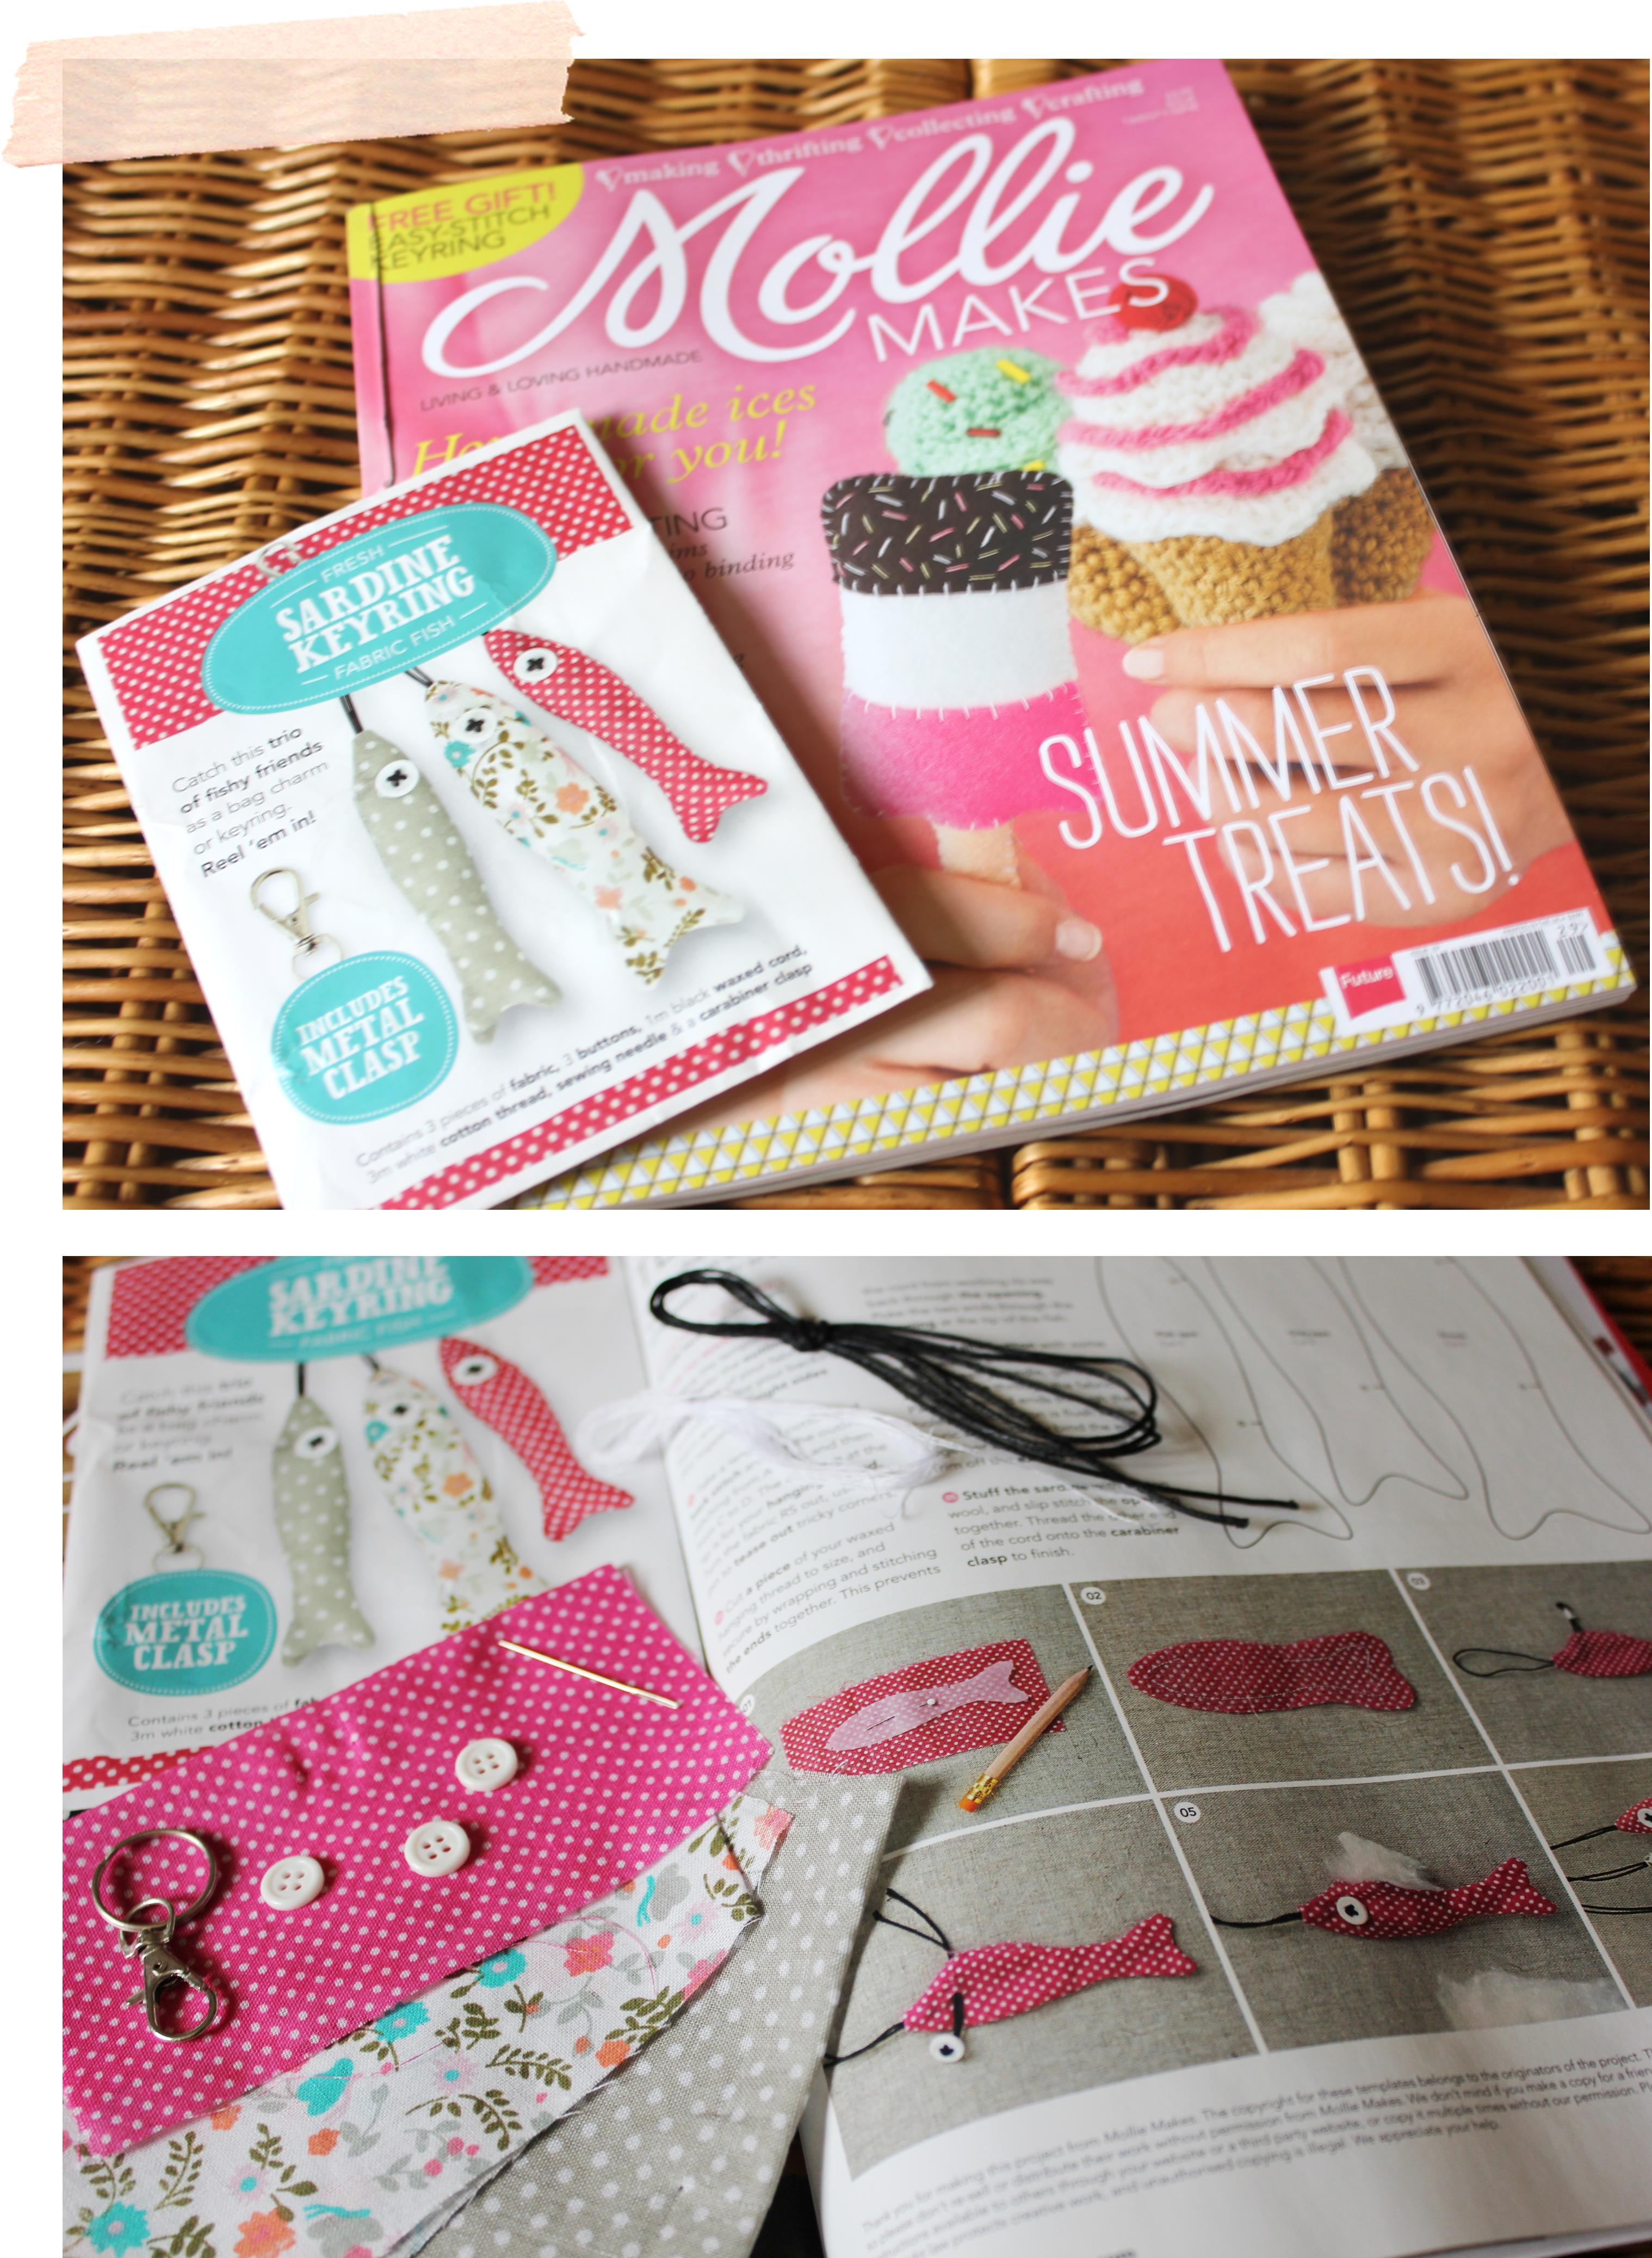 Cassiefairy lifestyle and craft blog review of Molly Makes issue 29